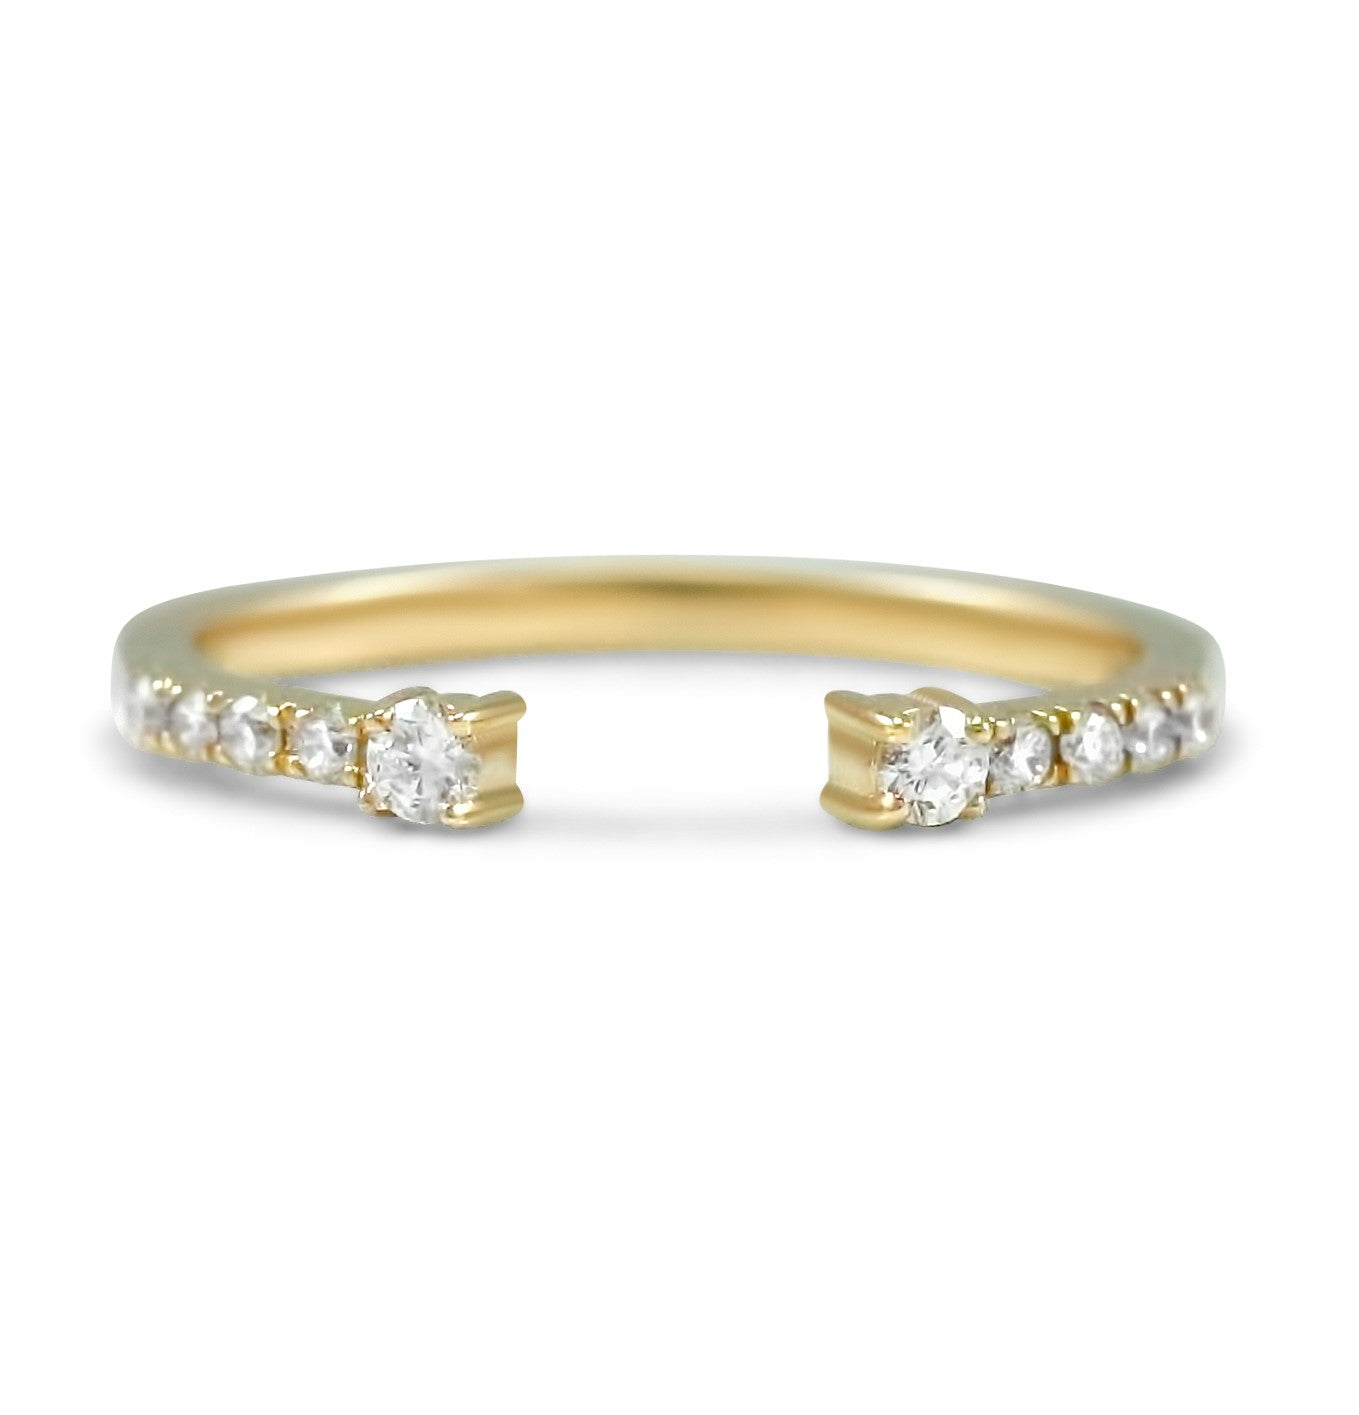 open diamond stackable wedding band 0.18tcw diamonds available in 14k yellow, rose or white gold